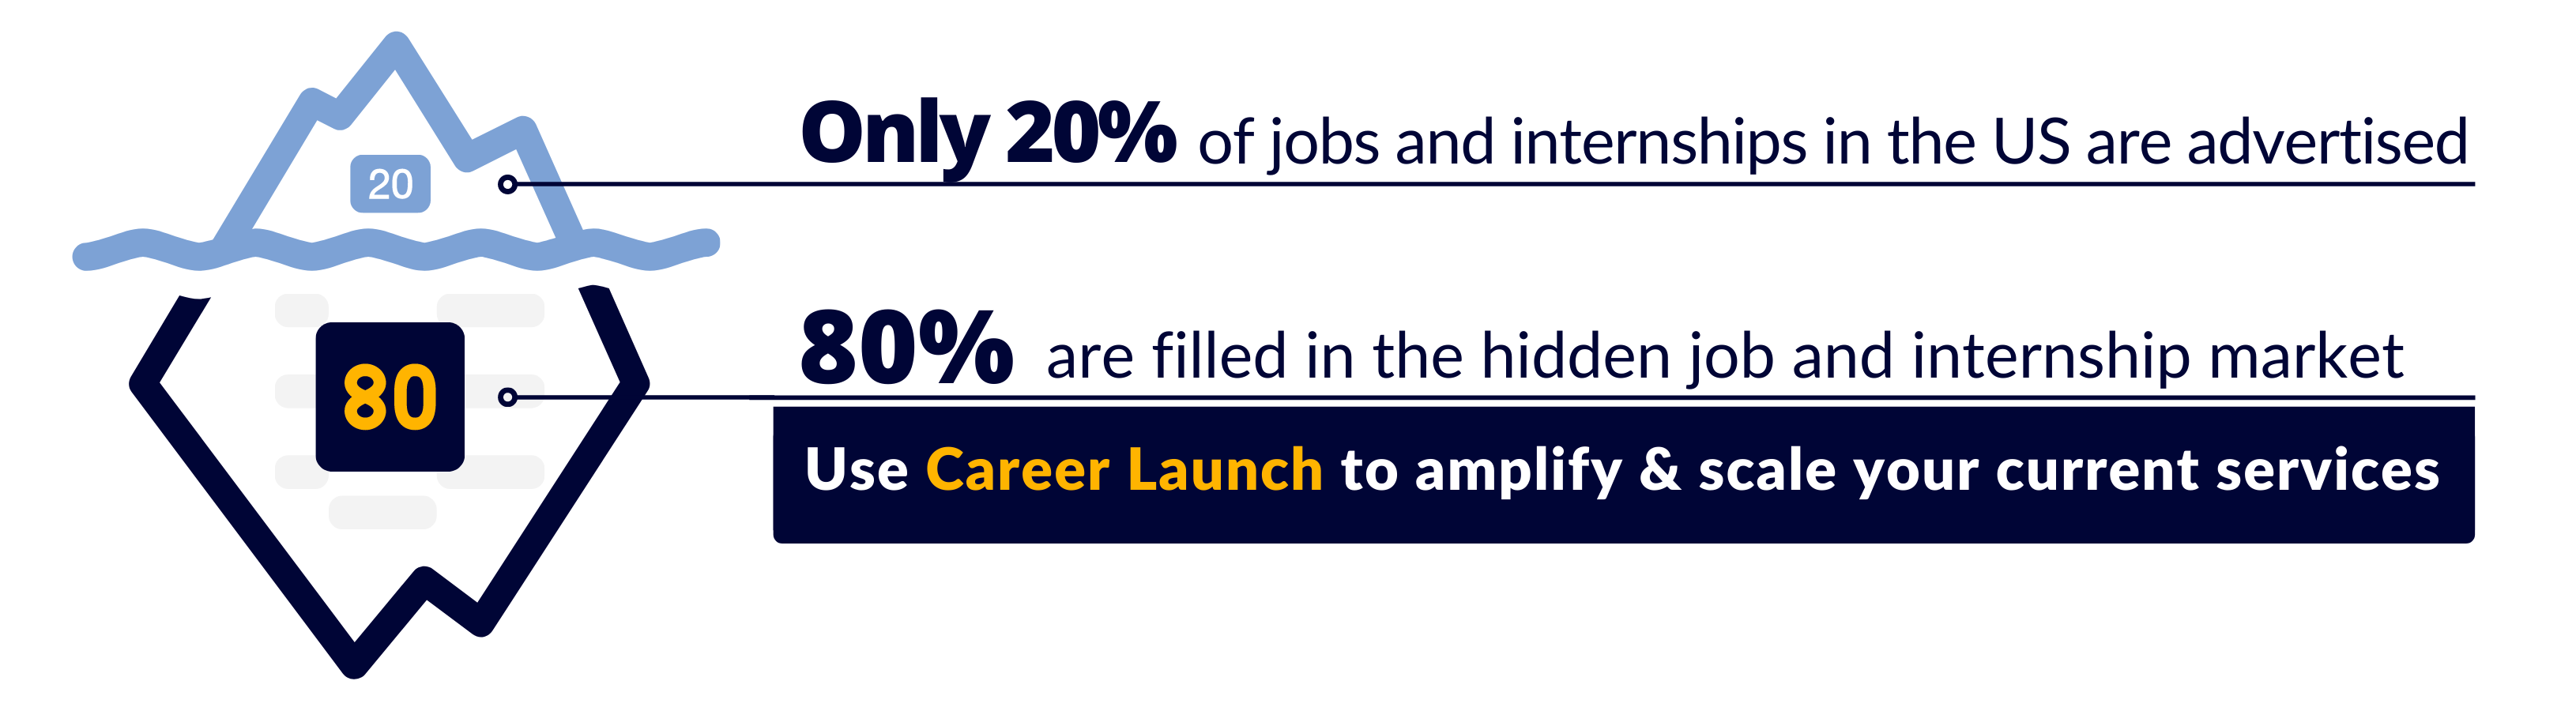 20% of jobs are advertised online. 80% are filled each year without being advertised.